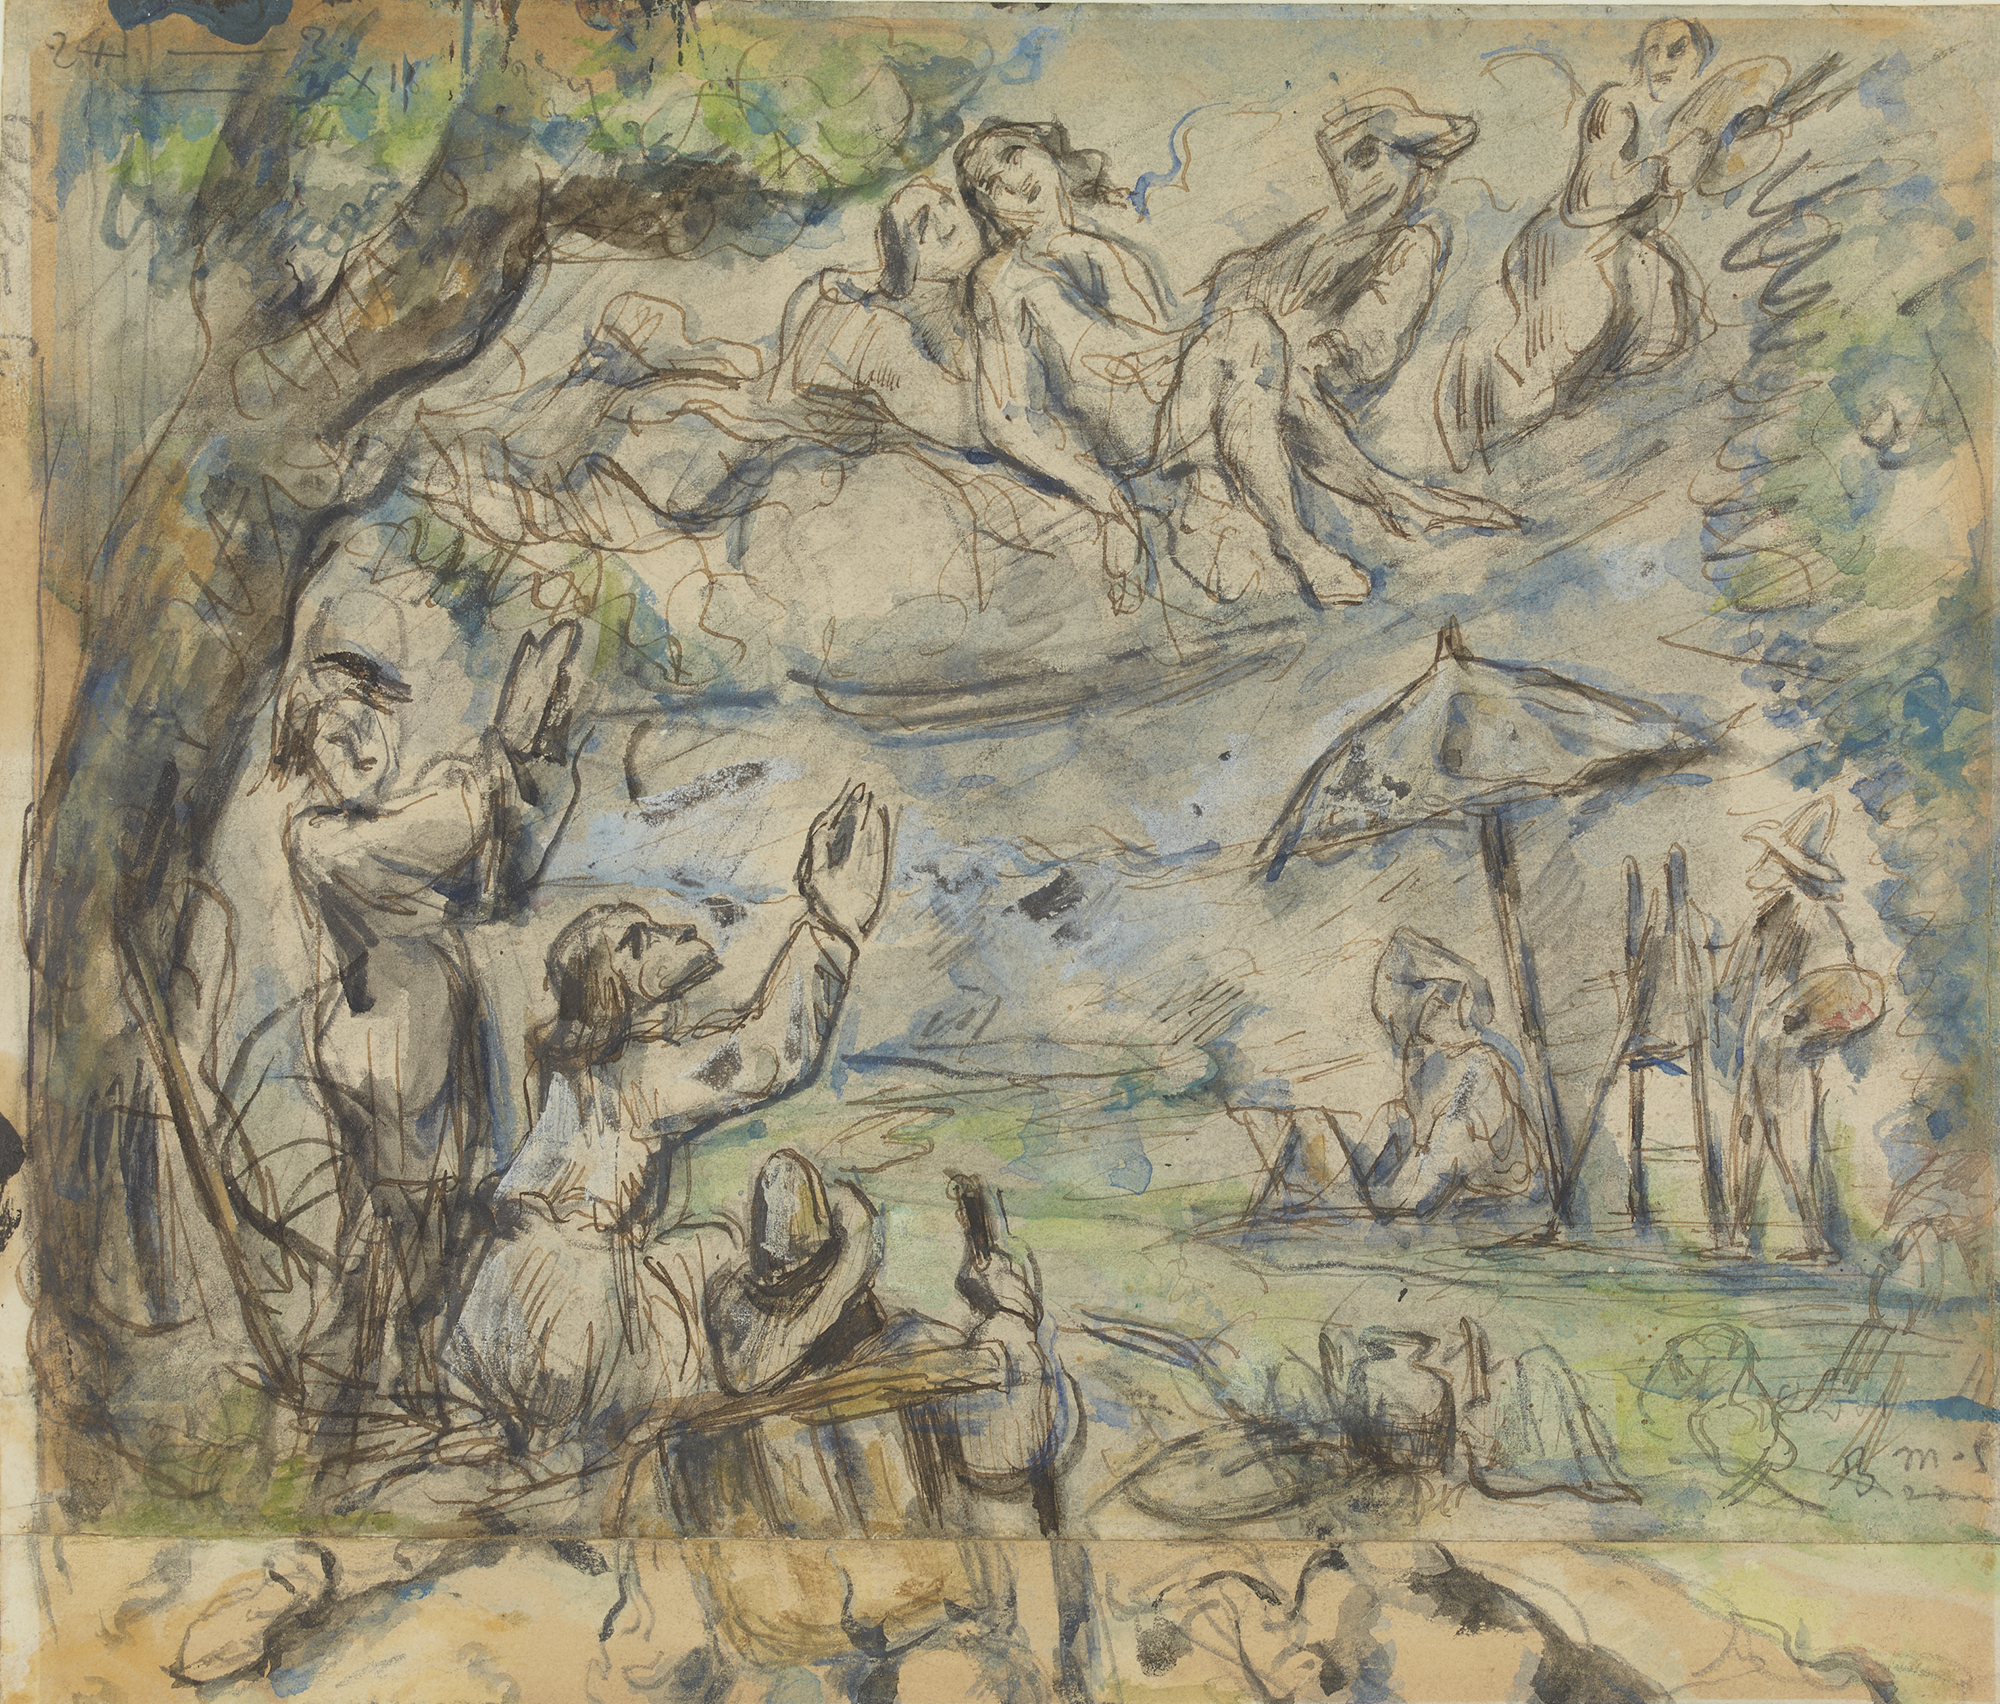 Cézanne’s drawings at MOMA